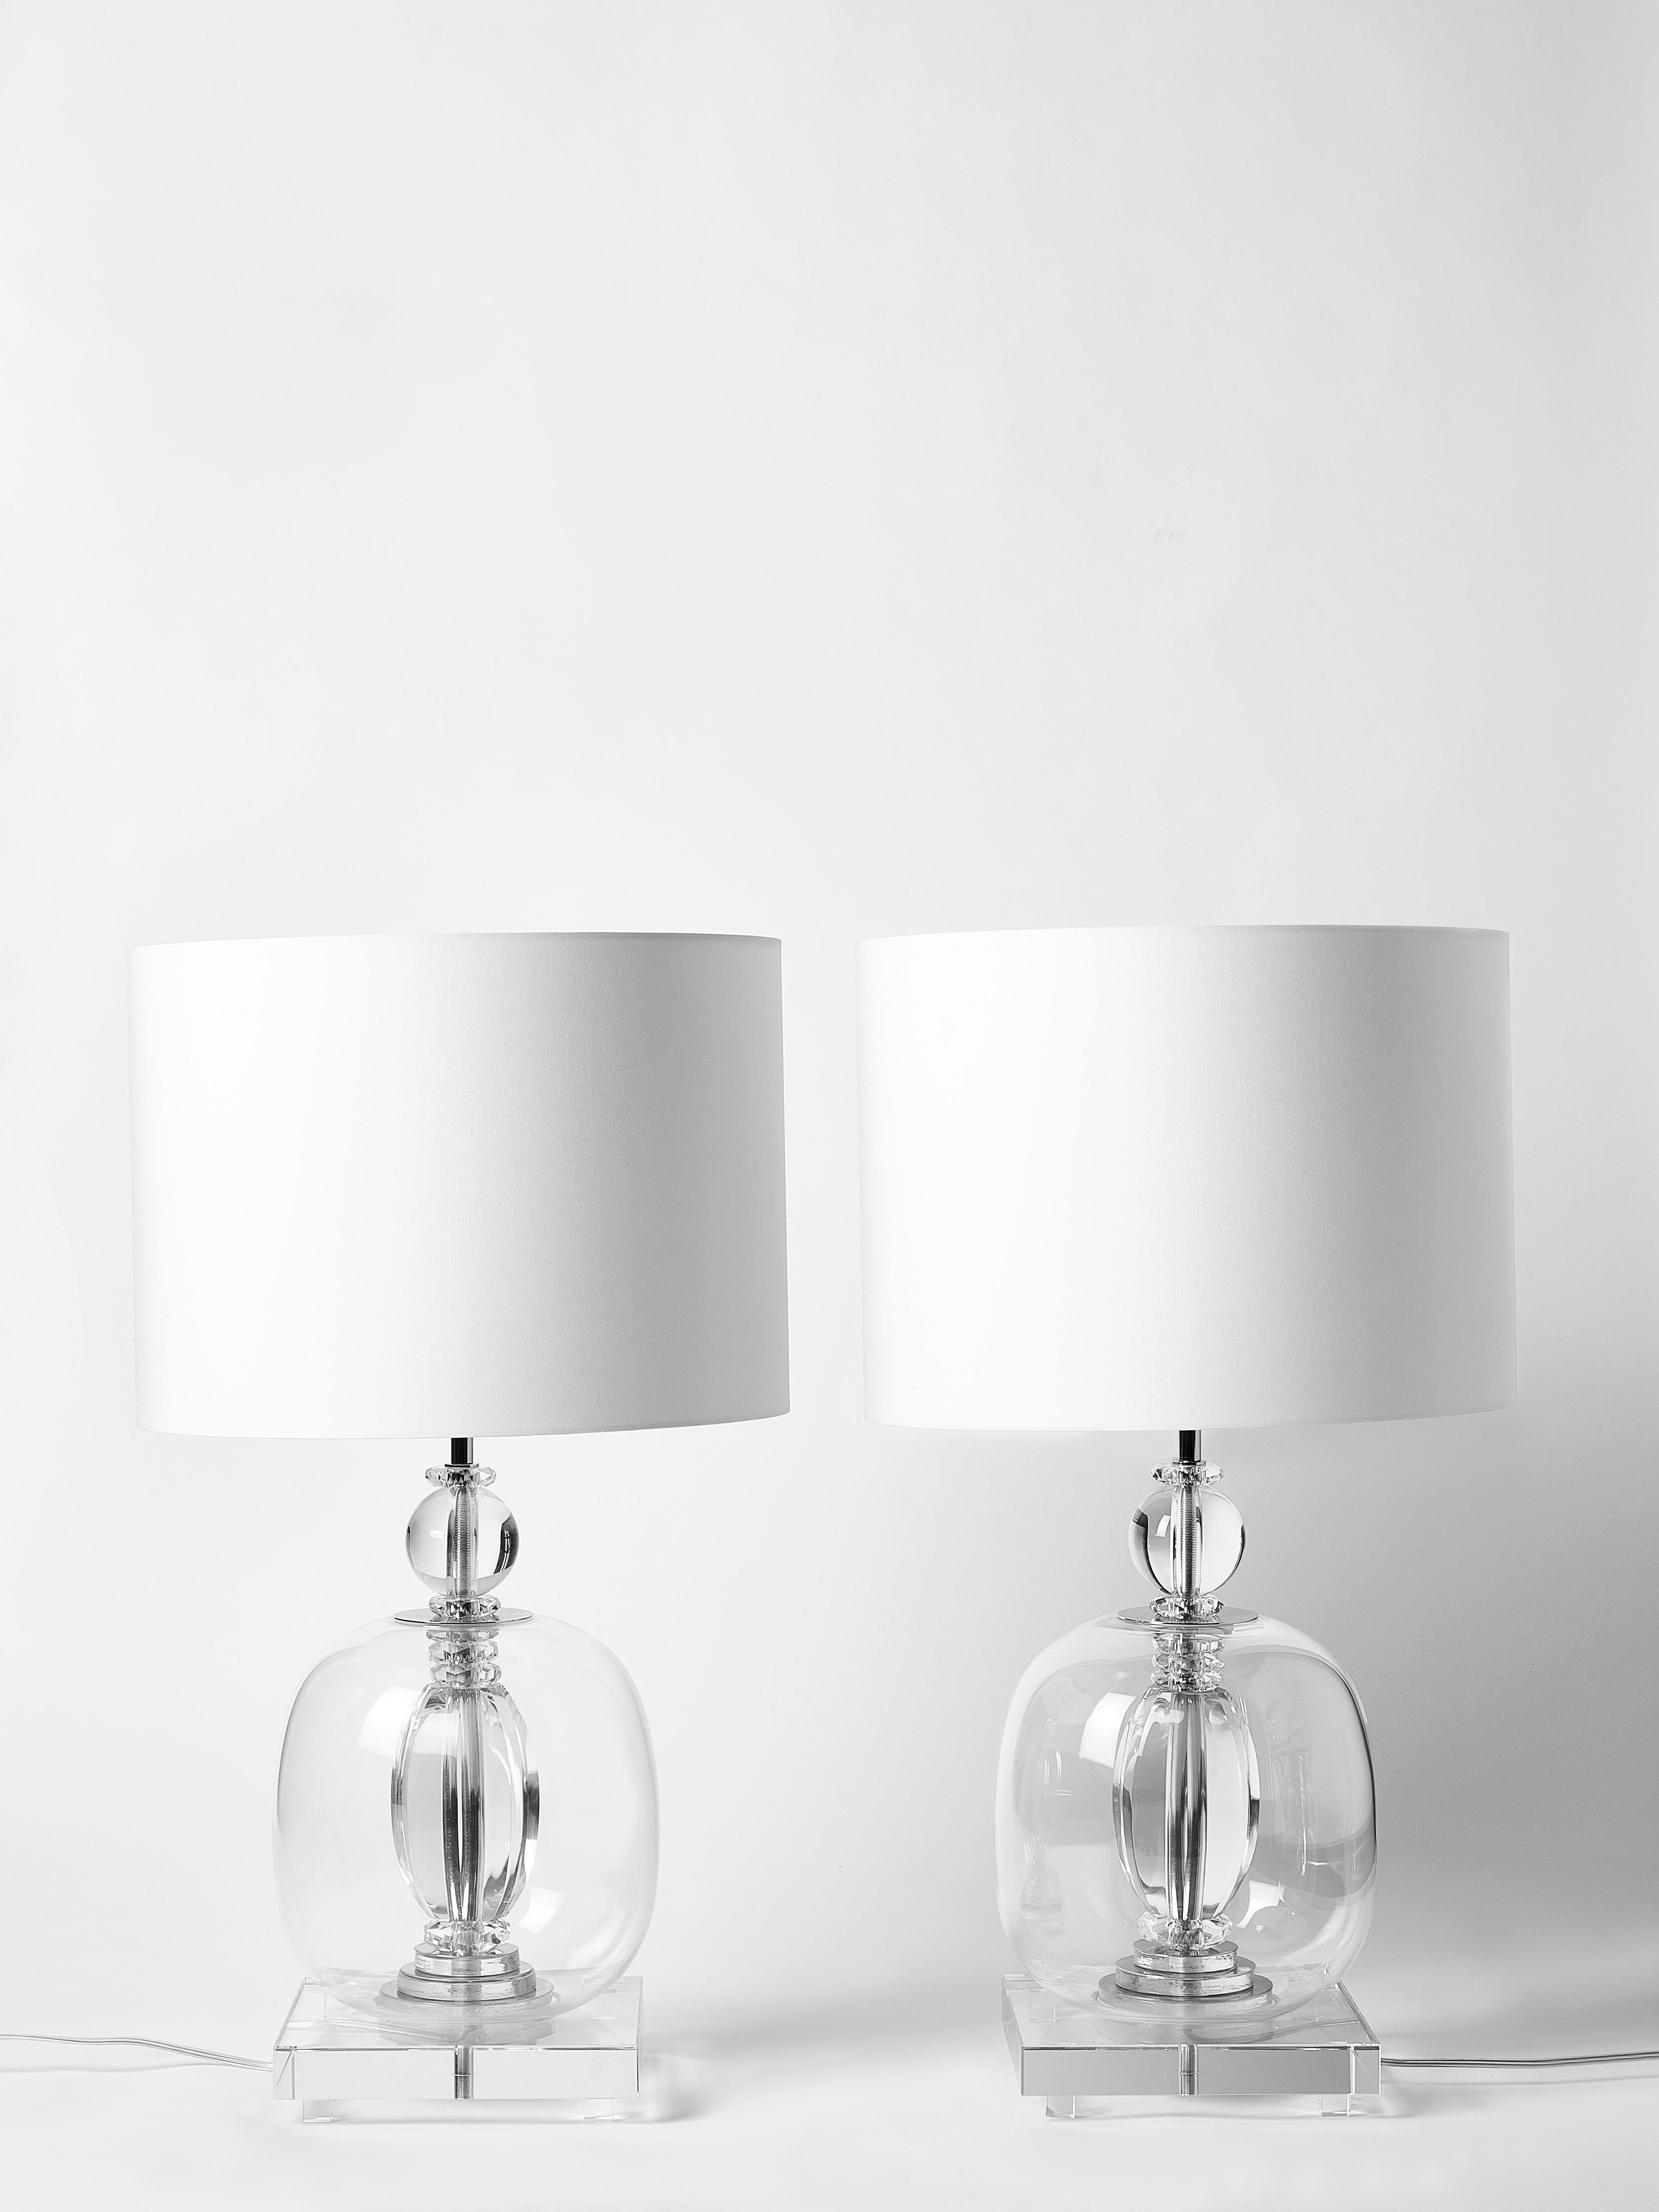 Pair of table lamps made of a stack of different pieces of transparent plexiglass and Murano glass giving the lamp a very clean and pure aesthetic.